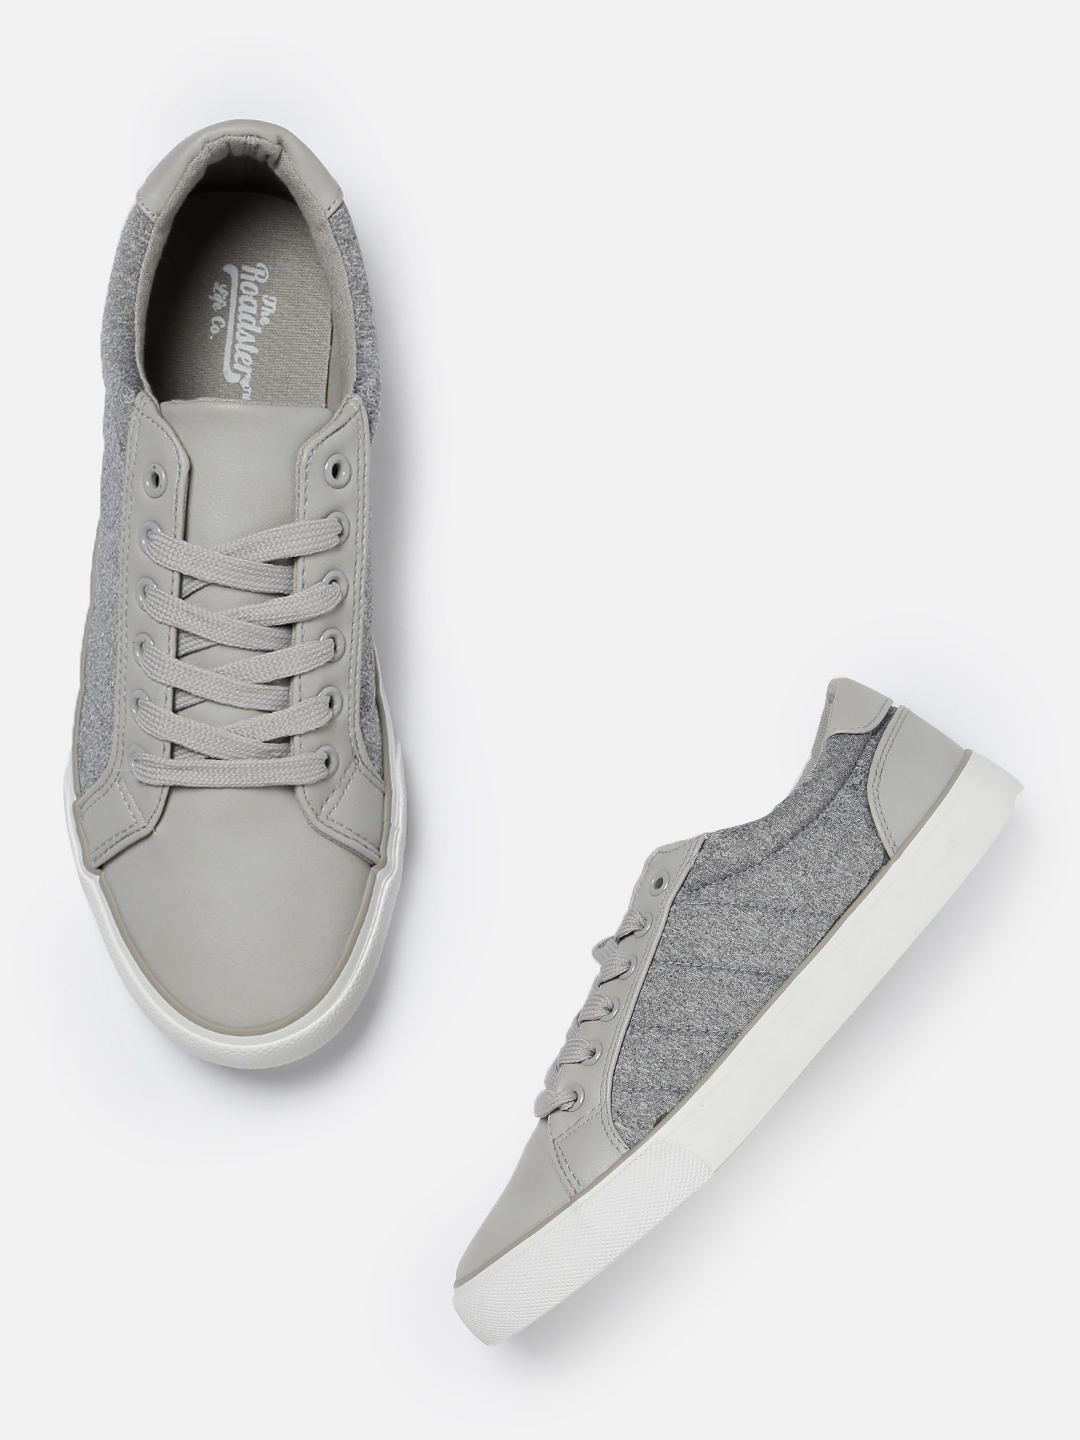 Grey Sneakers - Casual Shoes for Men 